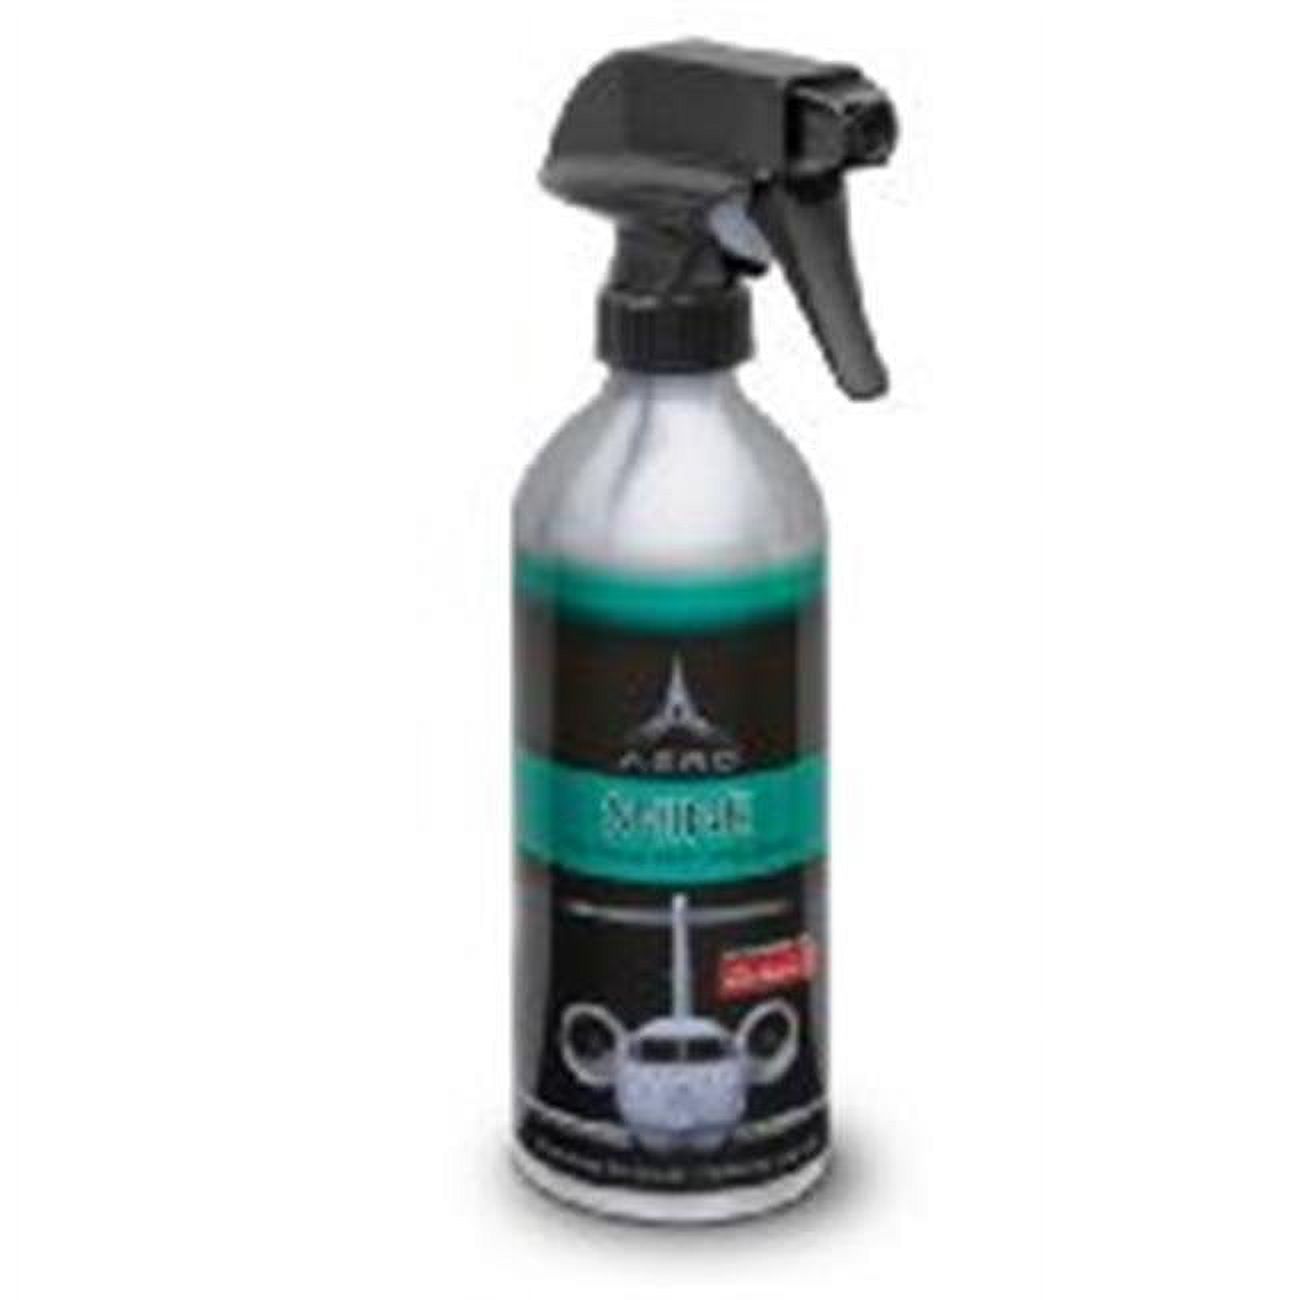 Aero 5664 SHINE Speed Wax & Dry Wash Protectant for Car/Auto Detailing 16oz - image 1 of 2